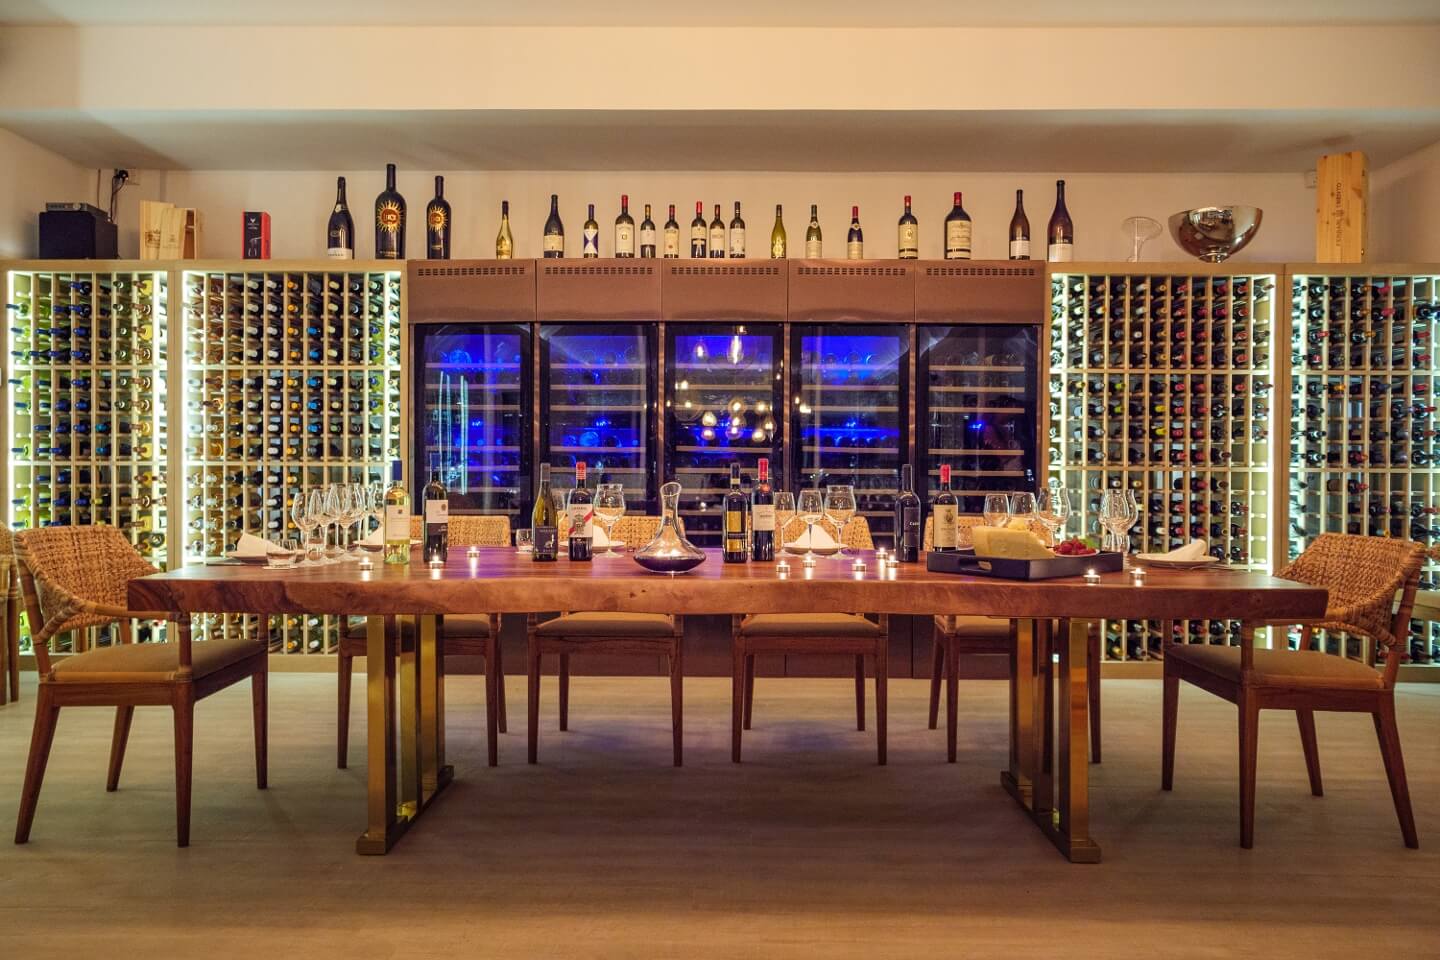 A SOPHISTICATED CELLAR OF FINE ITALIAN WINES